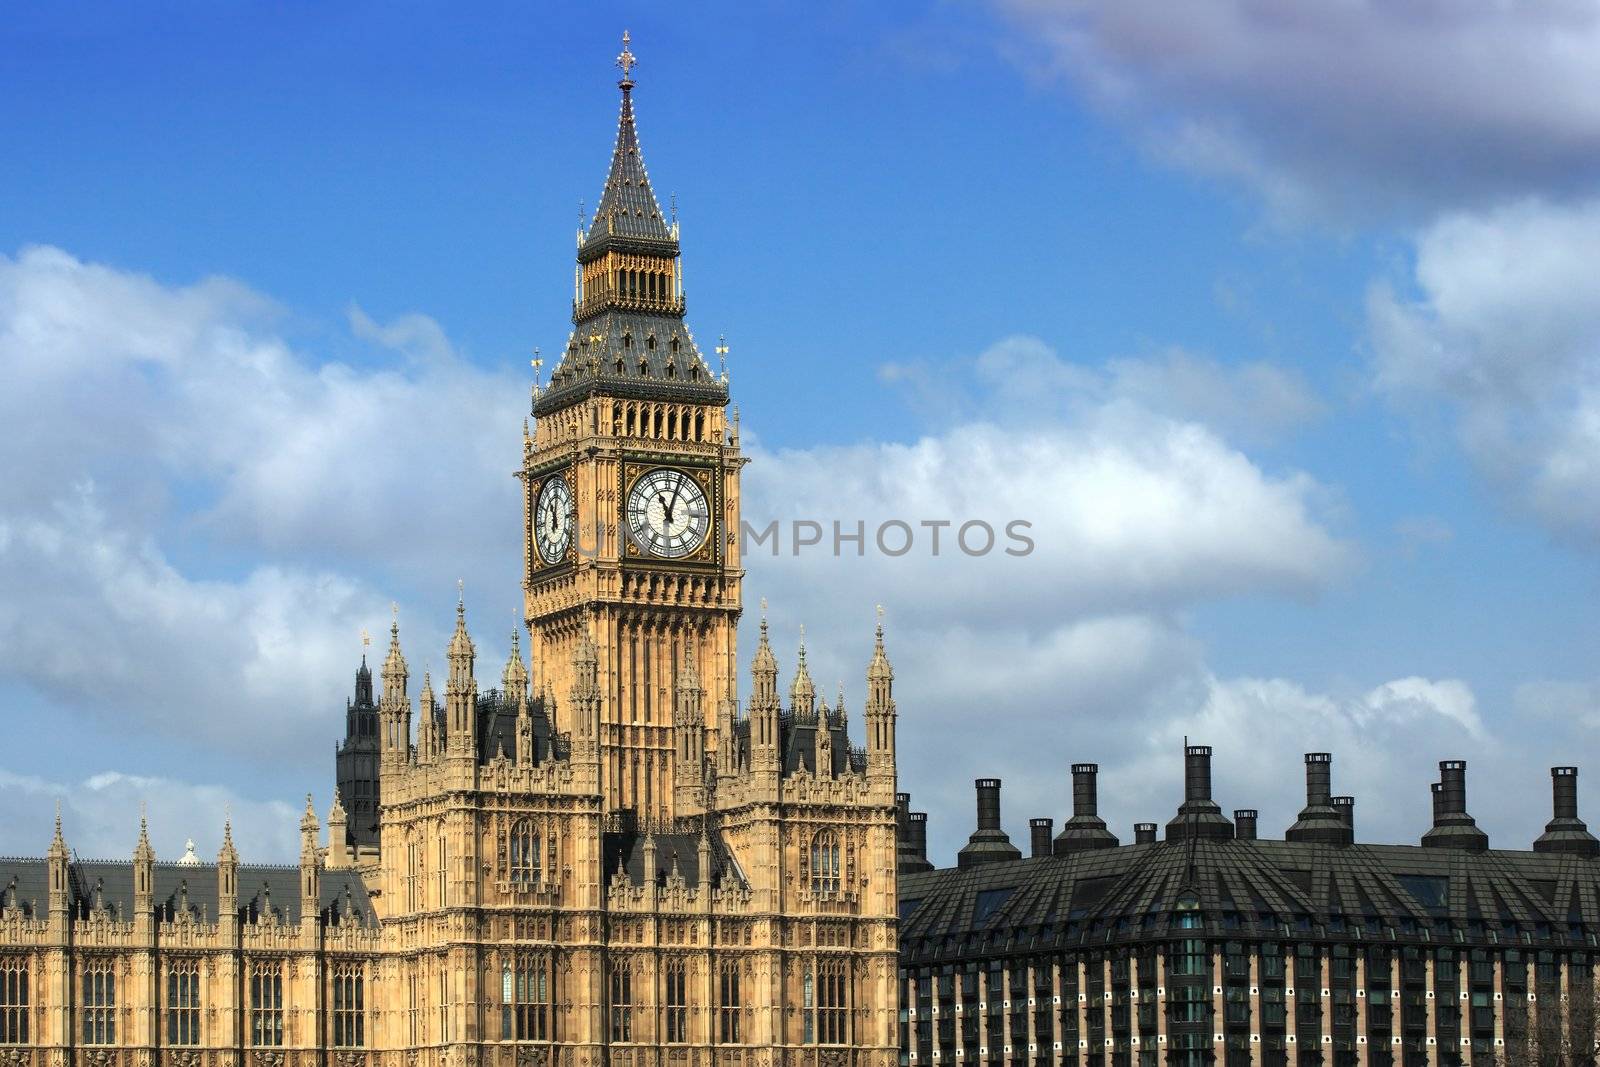 Big Ben and the Parliament buildings in London England.
